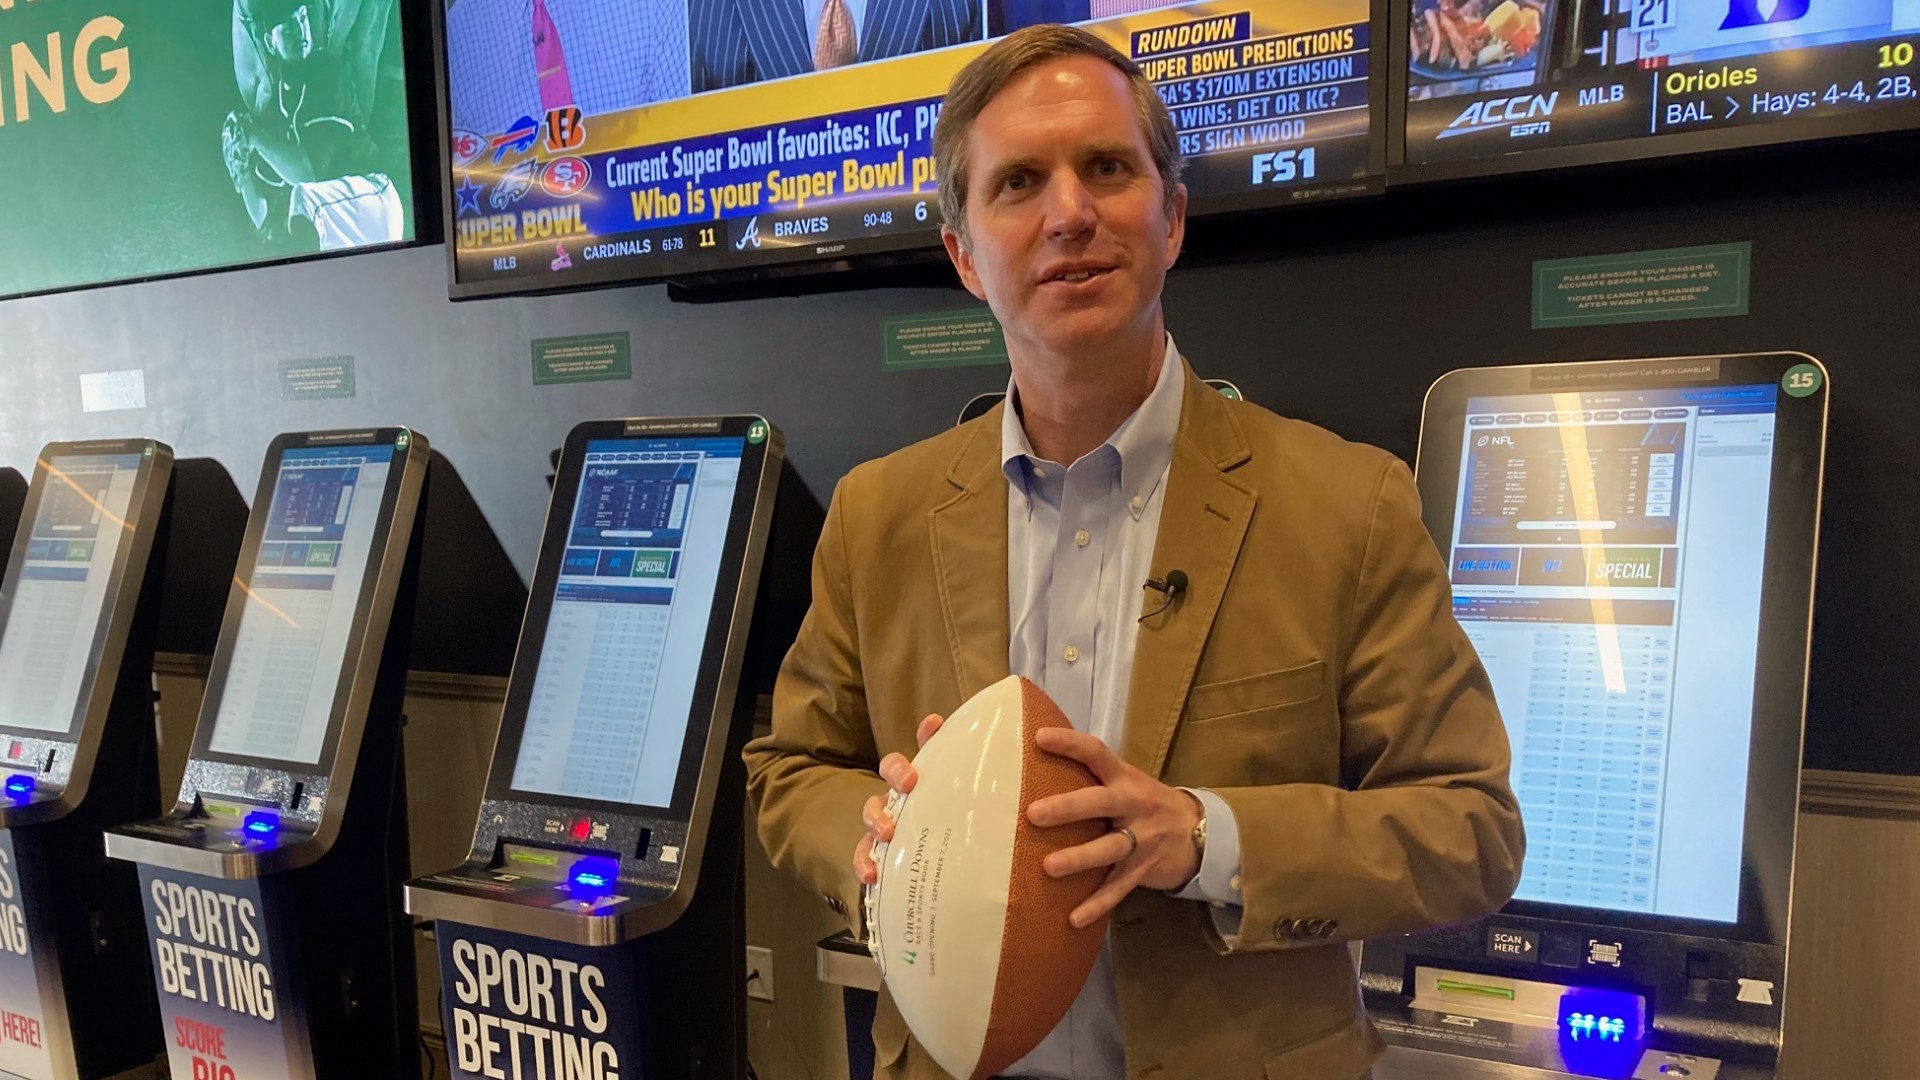 The governor said Thursday that preliminary numbers show more than $4.5 million in sports wagering since the launch two weeks ago.